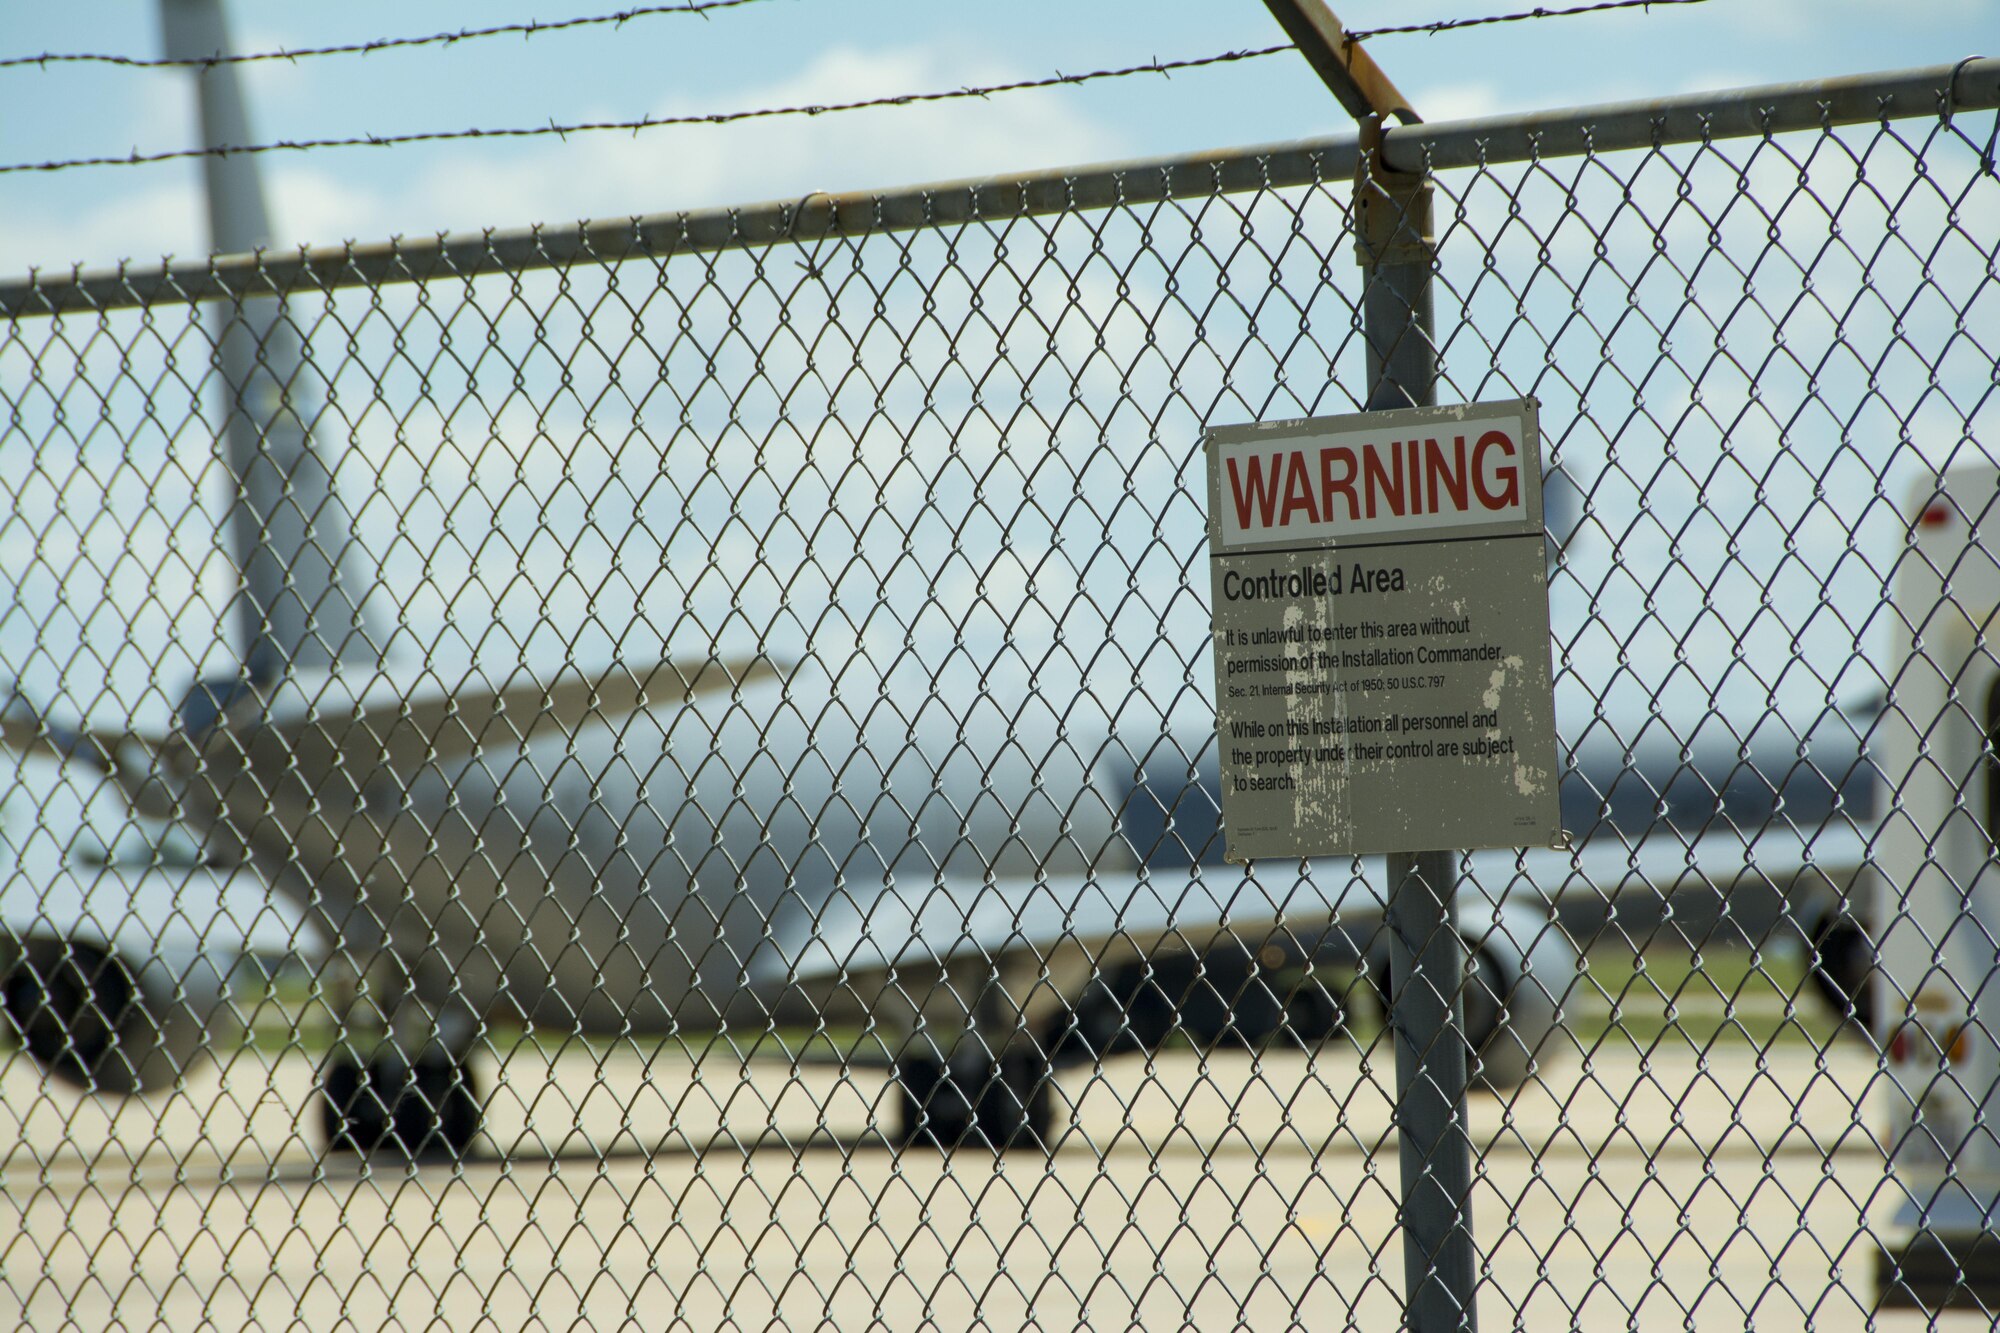 An 507th Air Refueling Wing KC-135 Stratotanker alert aircraft taxis from one ramp to another to accommodate for shifting winds during the June Operational Exercise 16 at Tinker AFB, Okla. JOE 16 areas of inspection included maintaining aircraft, securing critical assets, processing personnel and cargo, responding to and launching alert aircraft, running command post operations, and many other critical tasks. (U.S. Air Force Photo/Master Sgt. Grady Epperly)